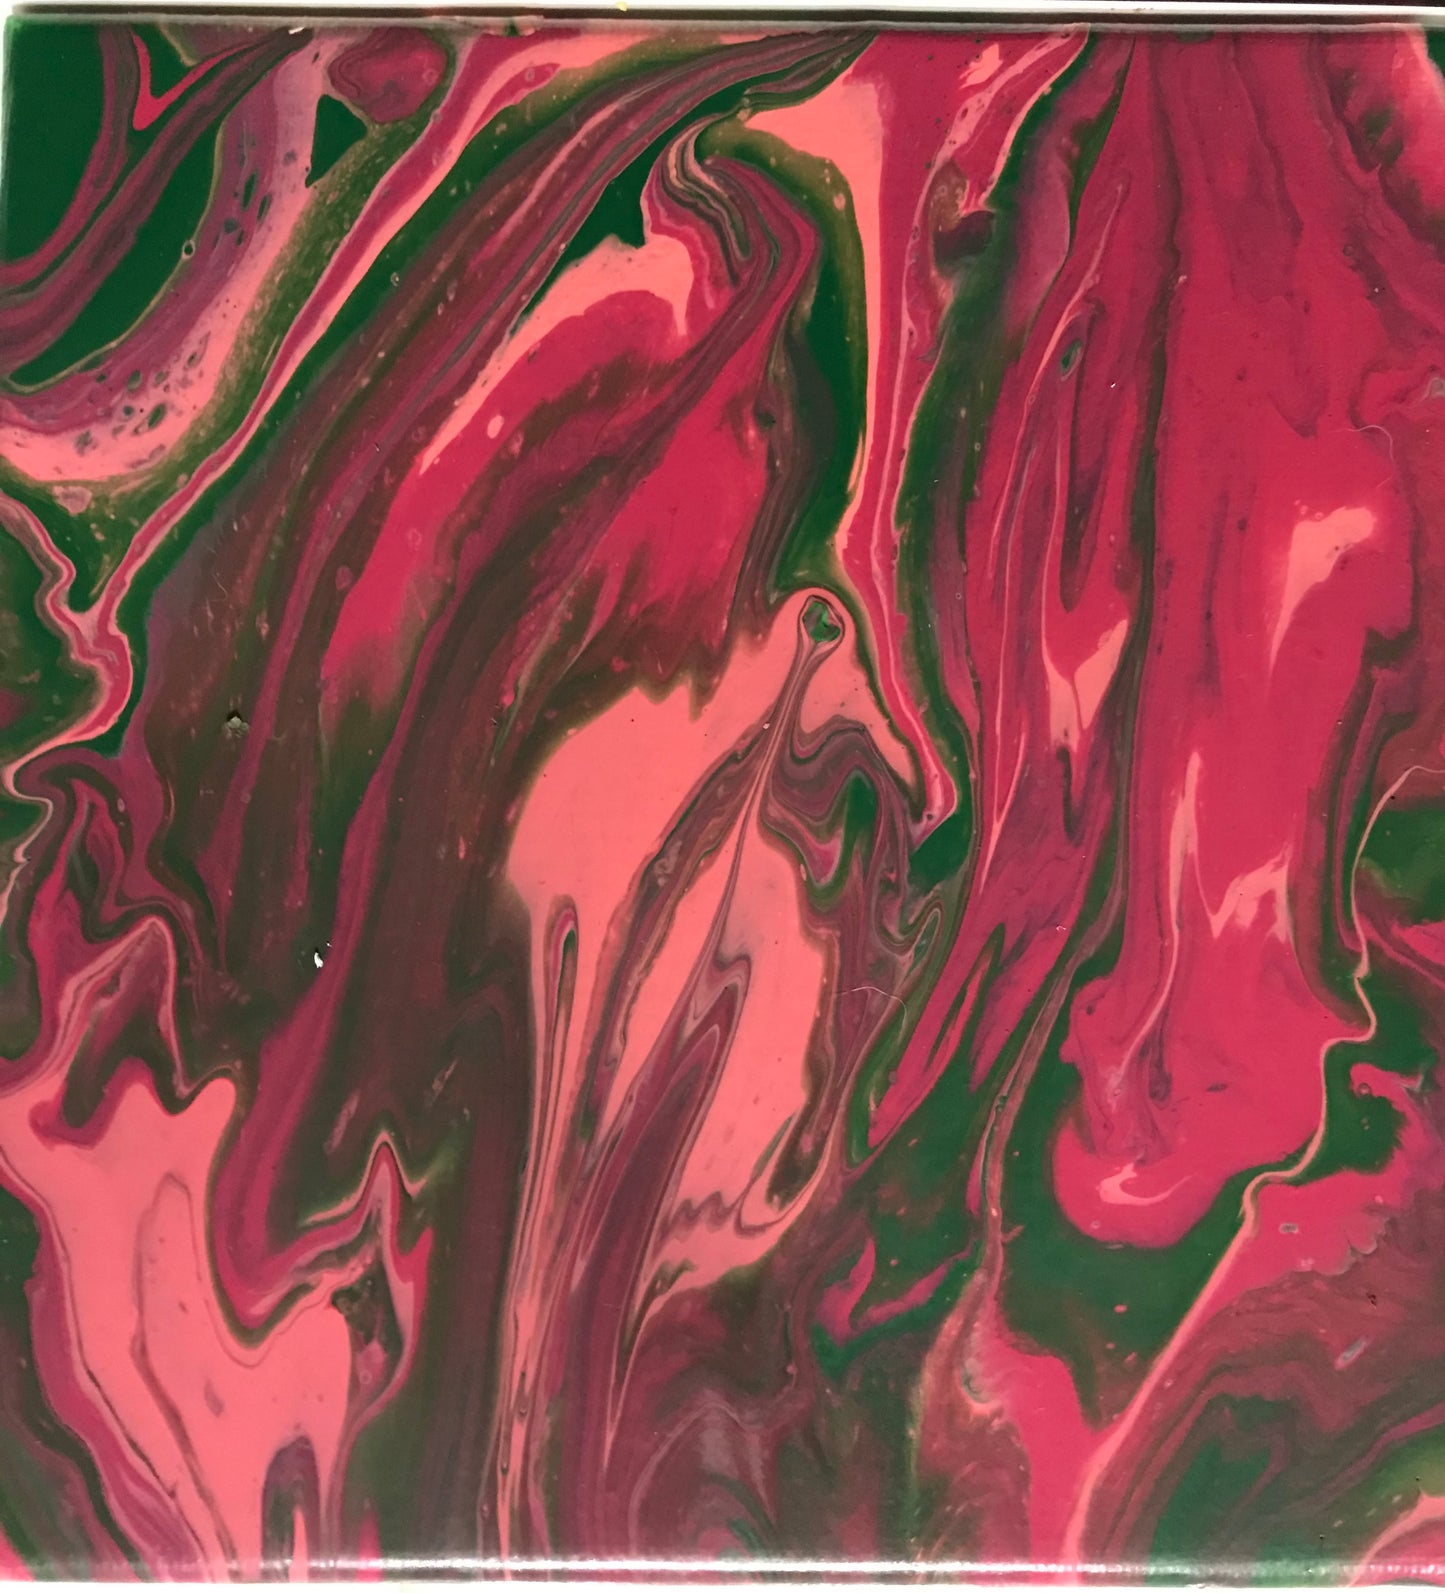 Sat, May 20th, 9-11A “Science & Art: Acrylic Pour” Public Family Painting Class